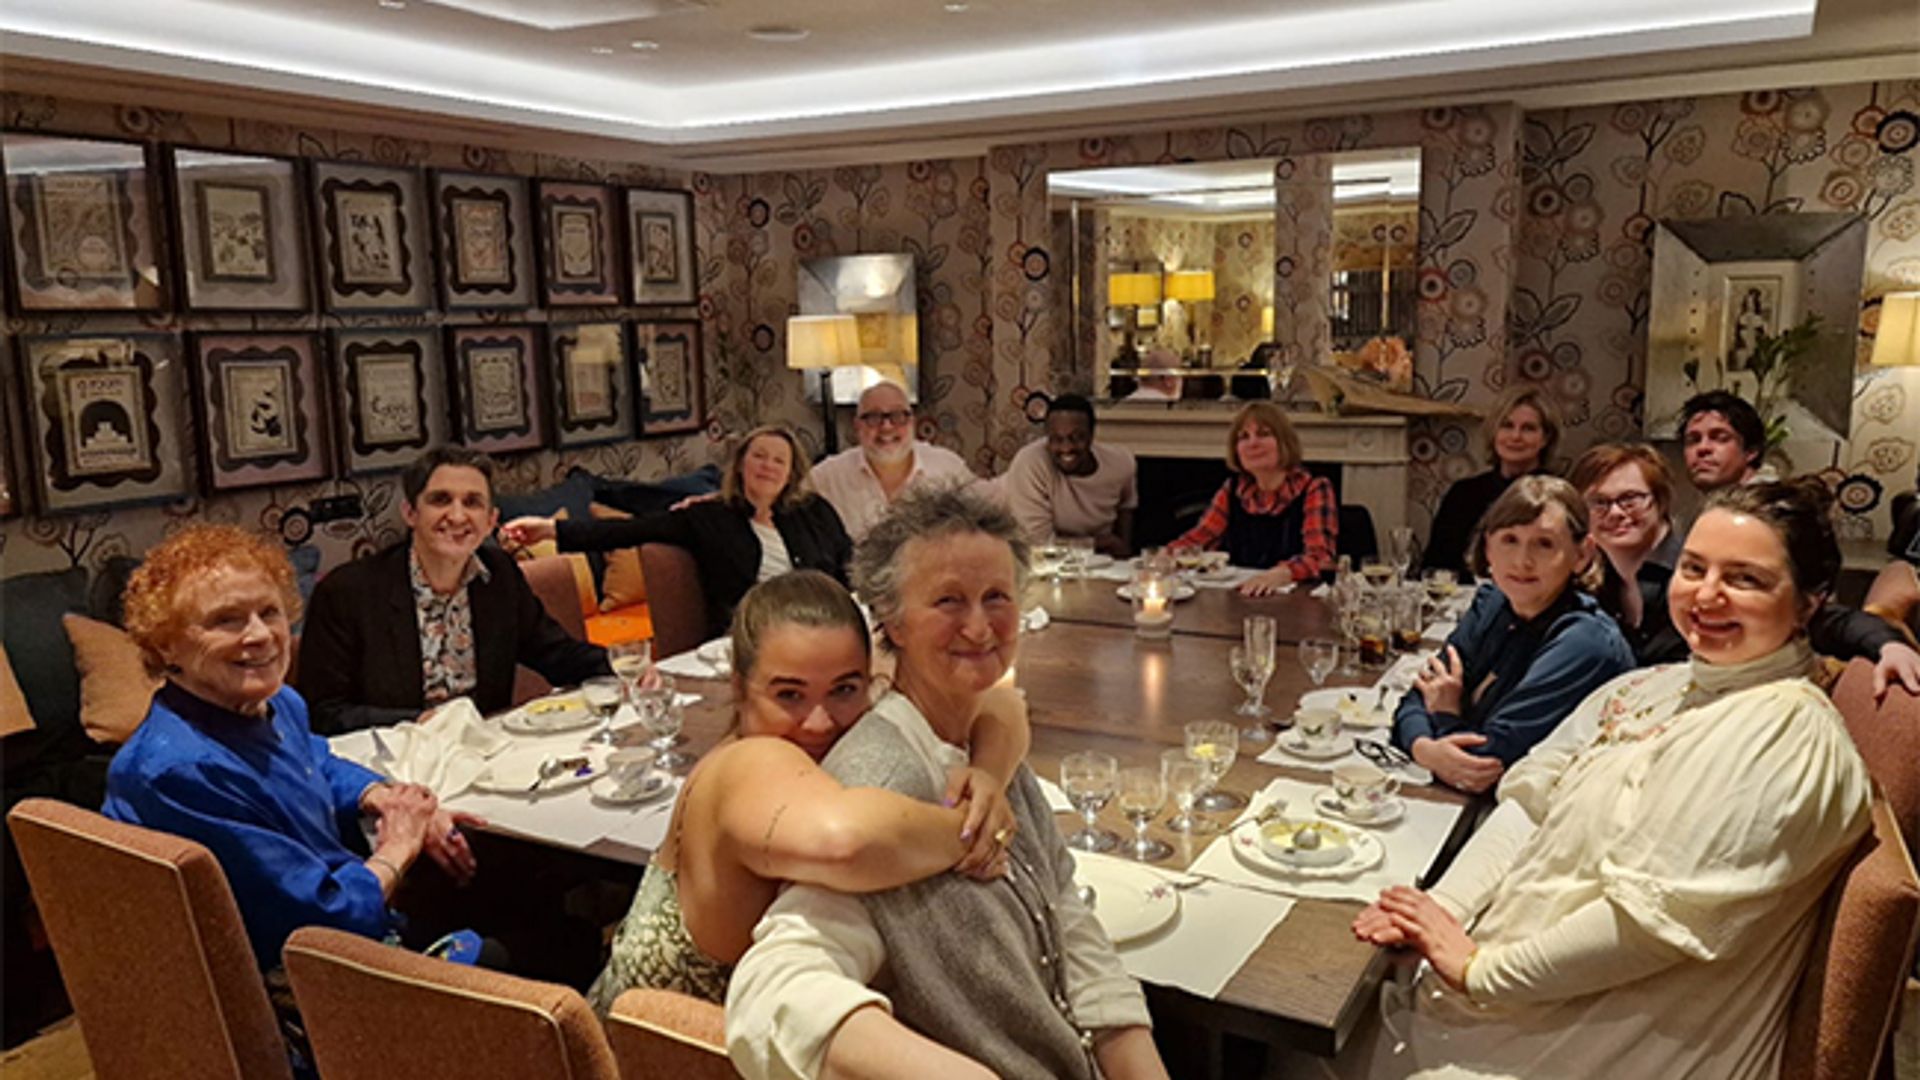 The Call The Midwife cast pose for a photo as they enjoy a meal in London